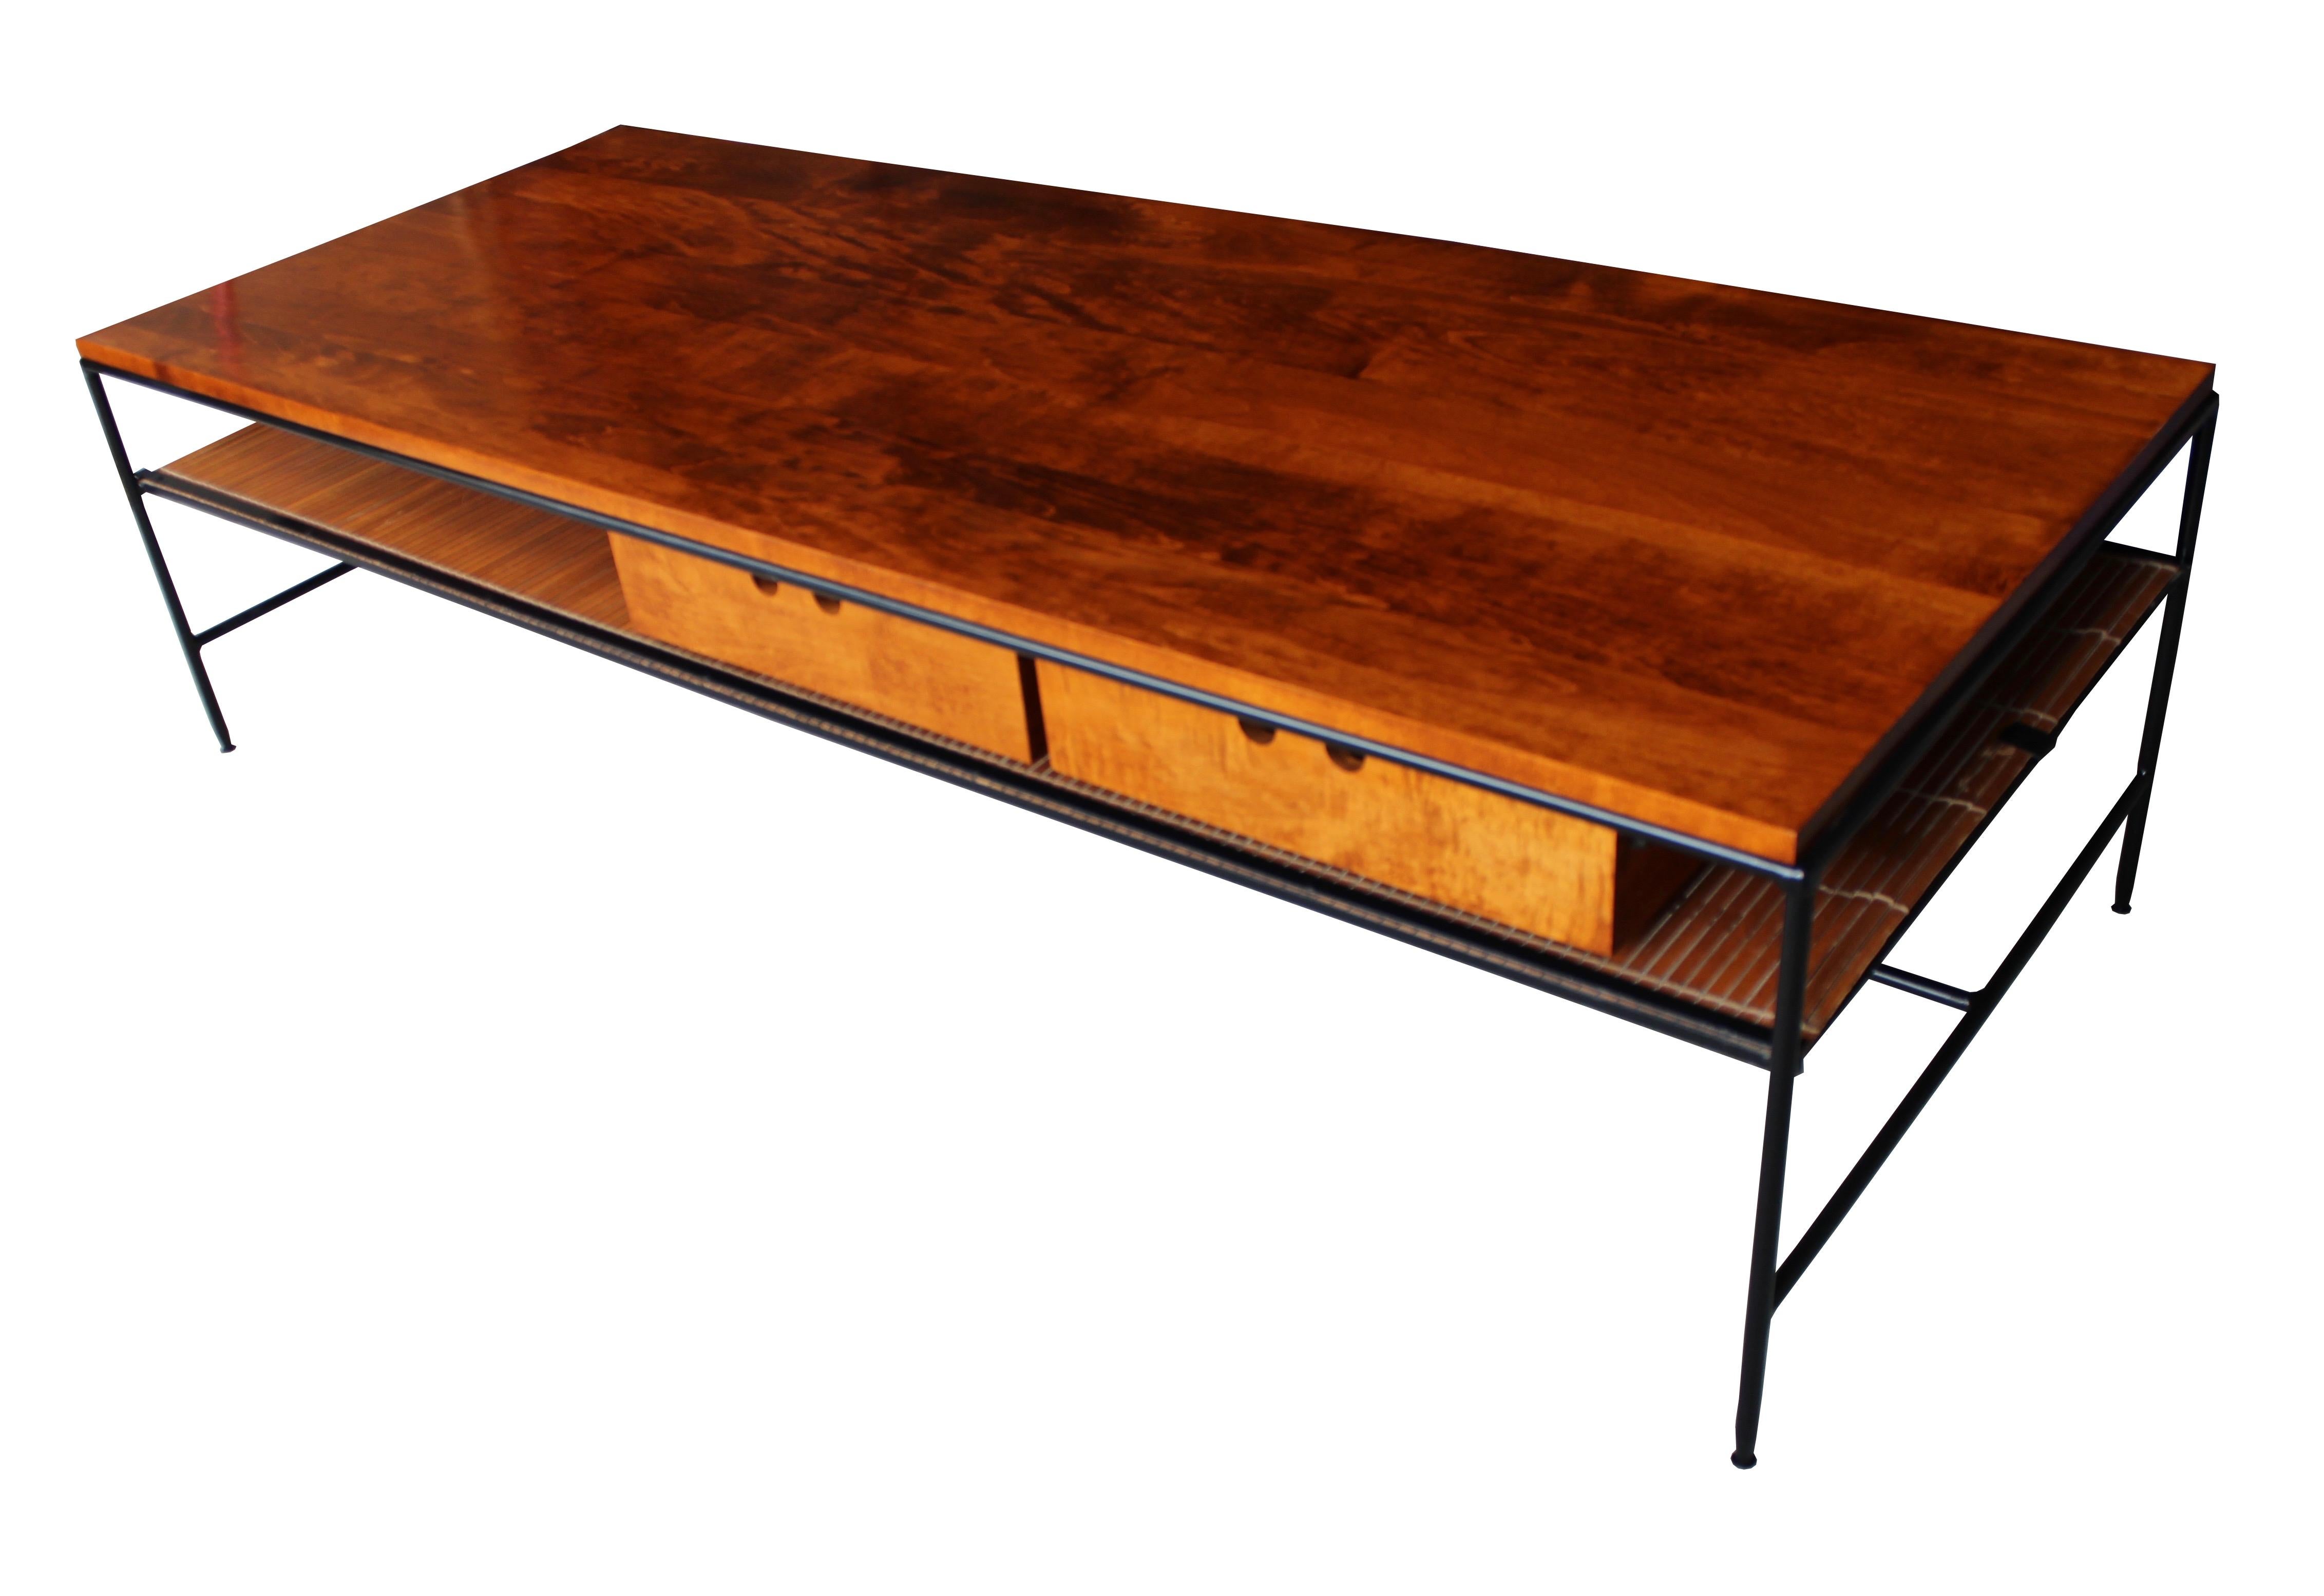 Steel Mid-Century Modern Maple Coffee Table by Paul McCobb for Planner For Sale